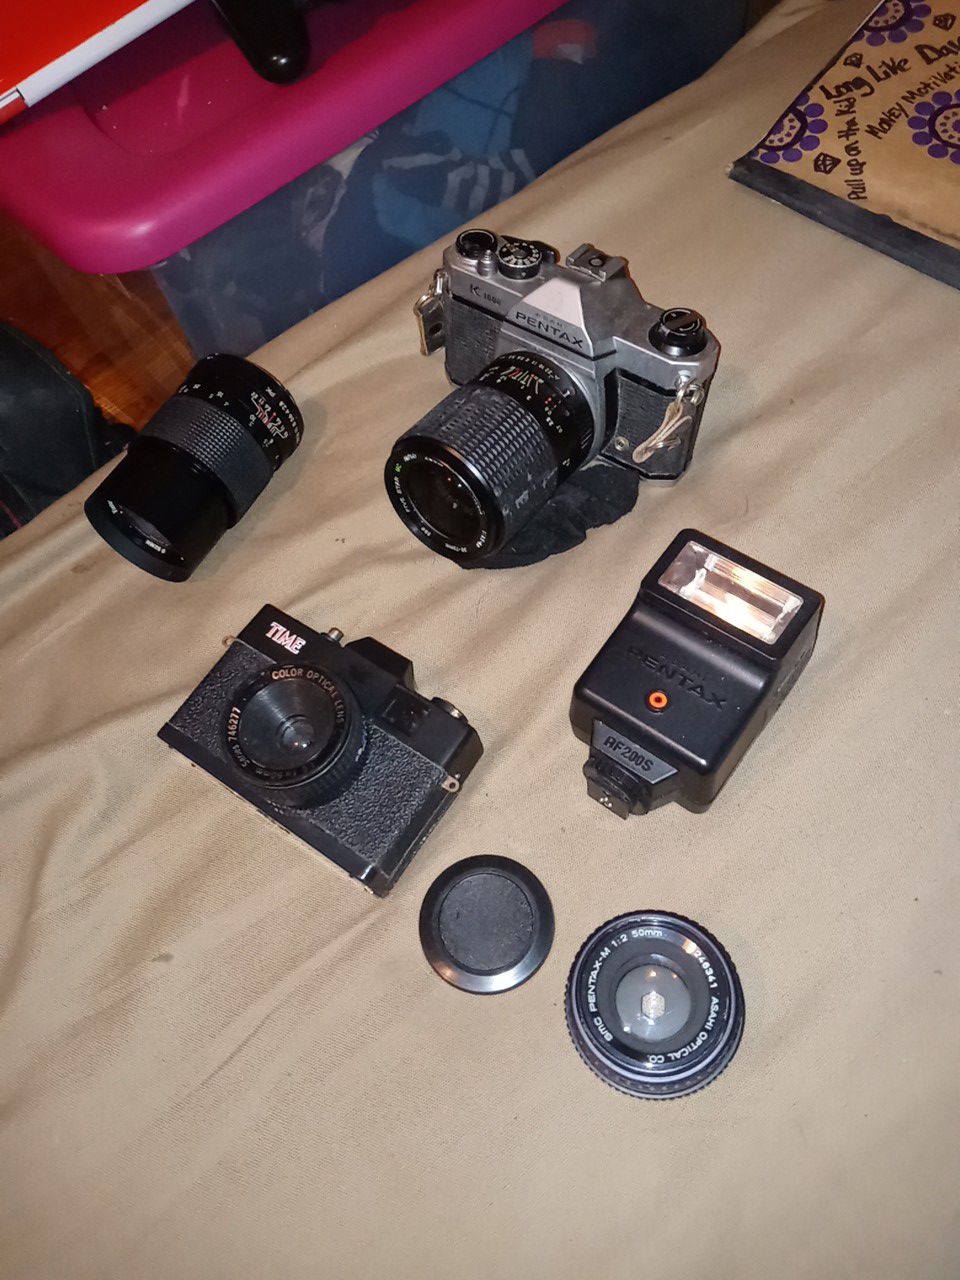 Asahi Pentax K1000 and a Time camera alot of attachments FYI the picture with price is only the camera with one lens I have 3 lens and the flash